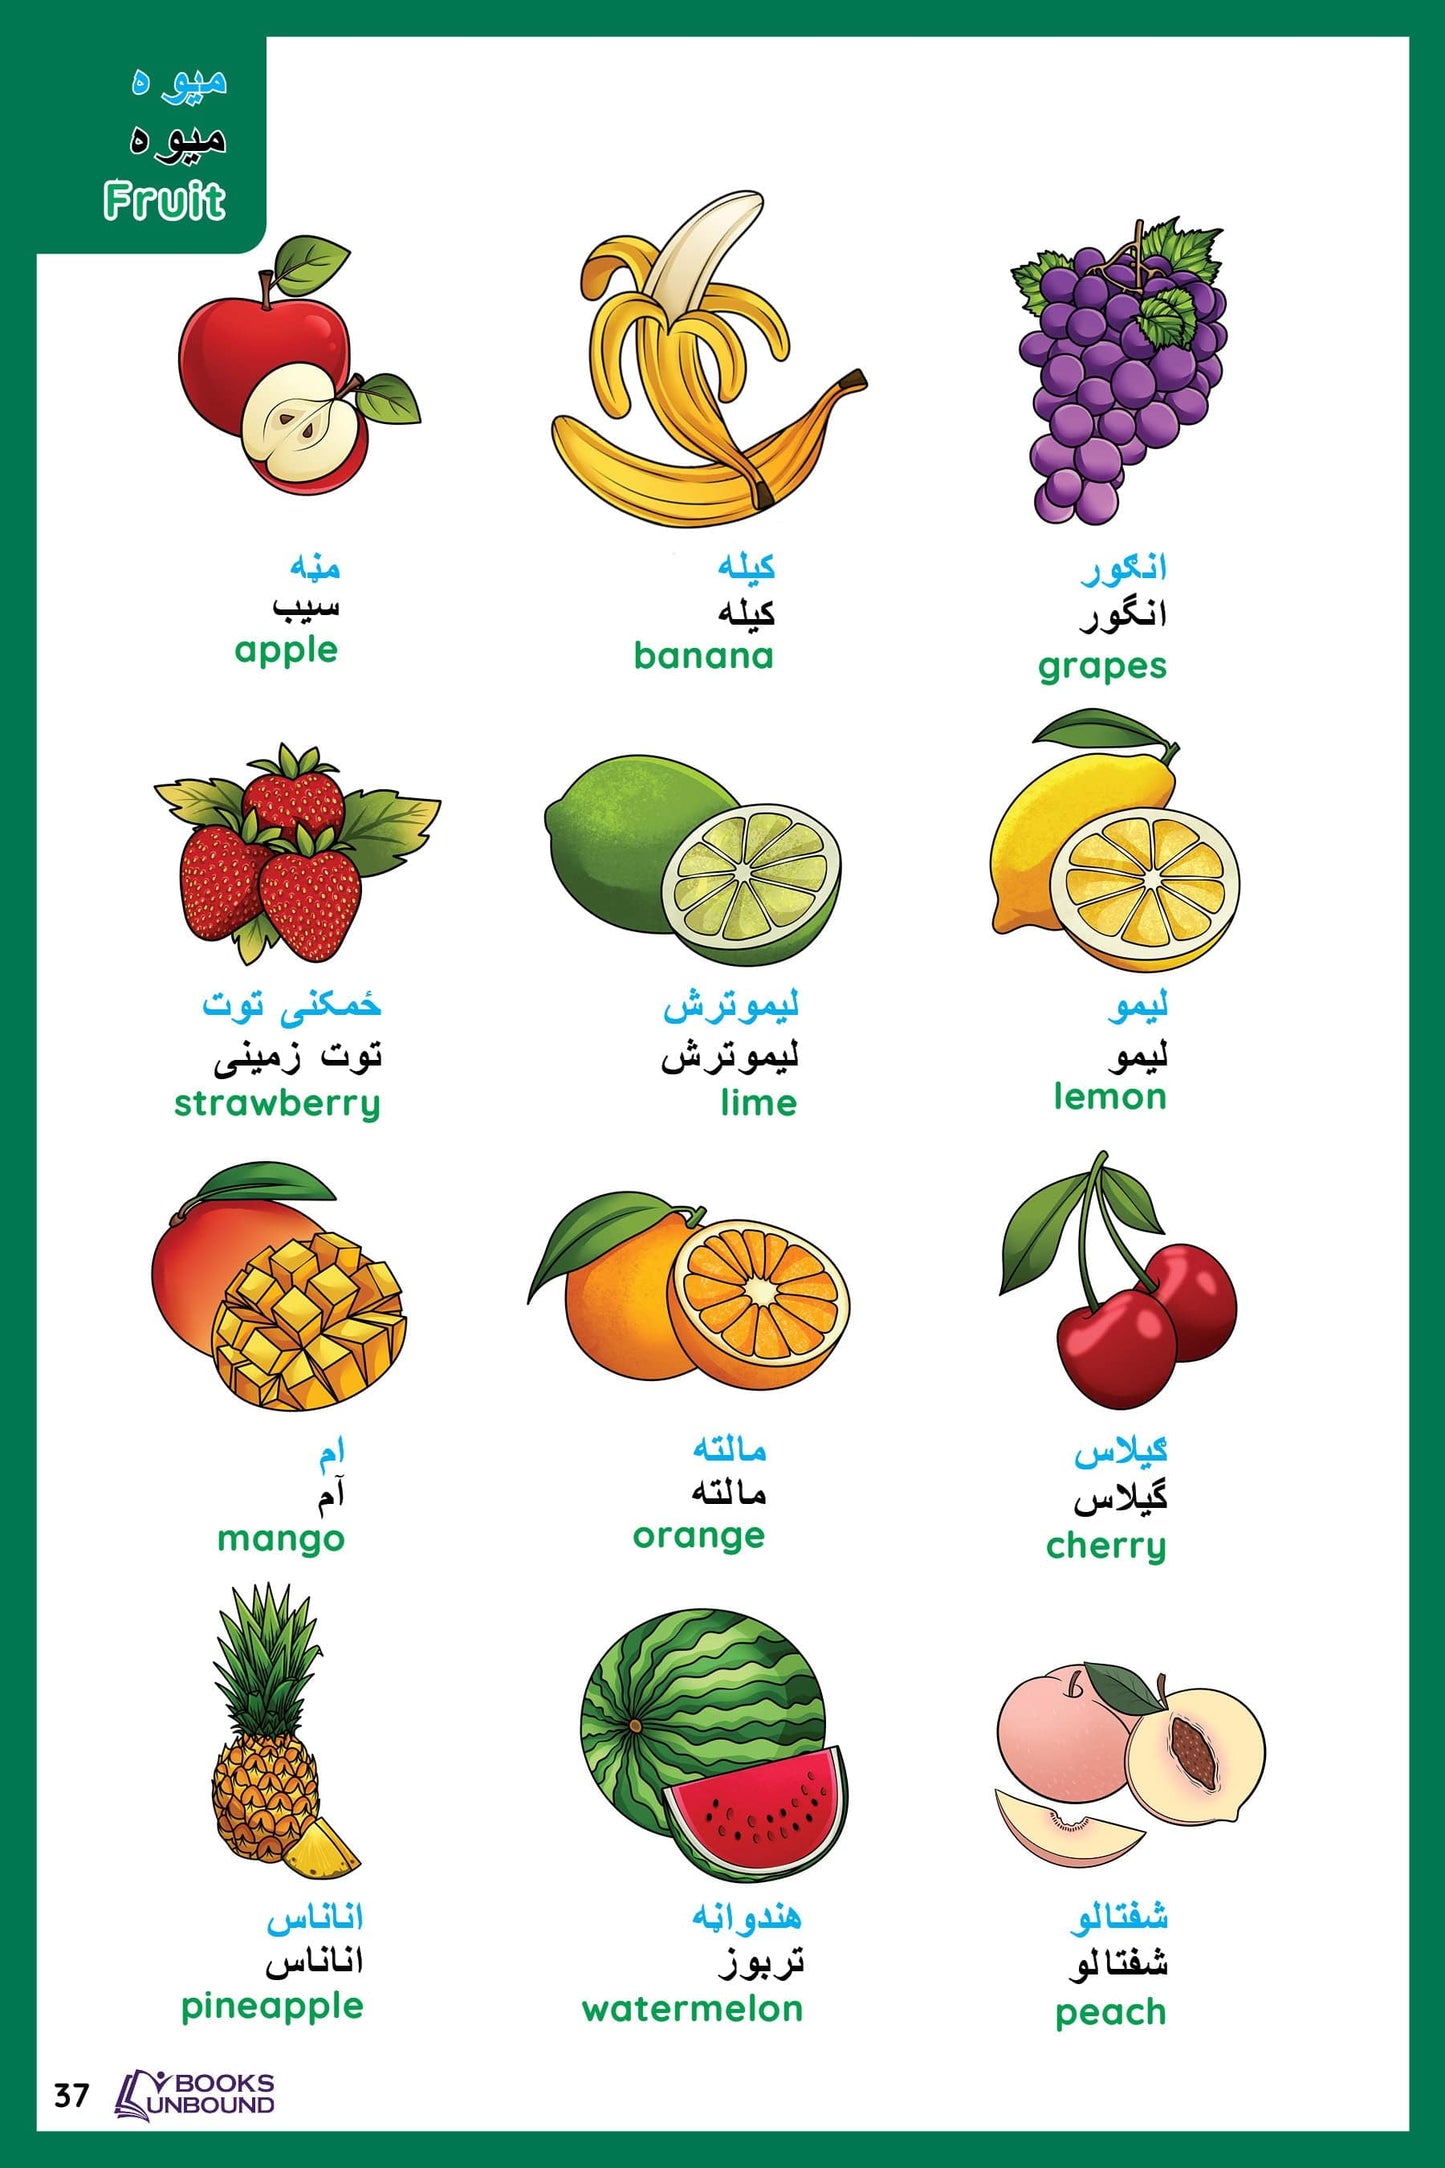 Fruits in Afghan Picture Dictionary